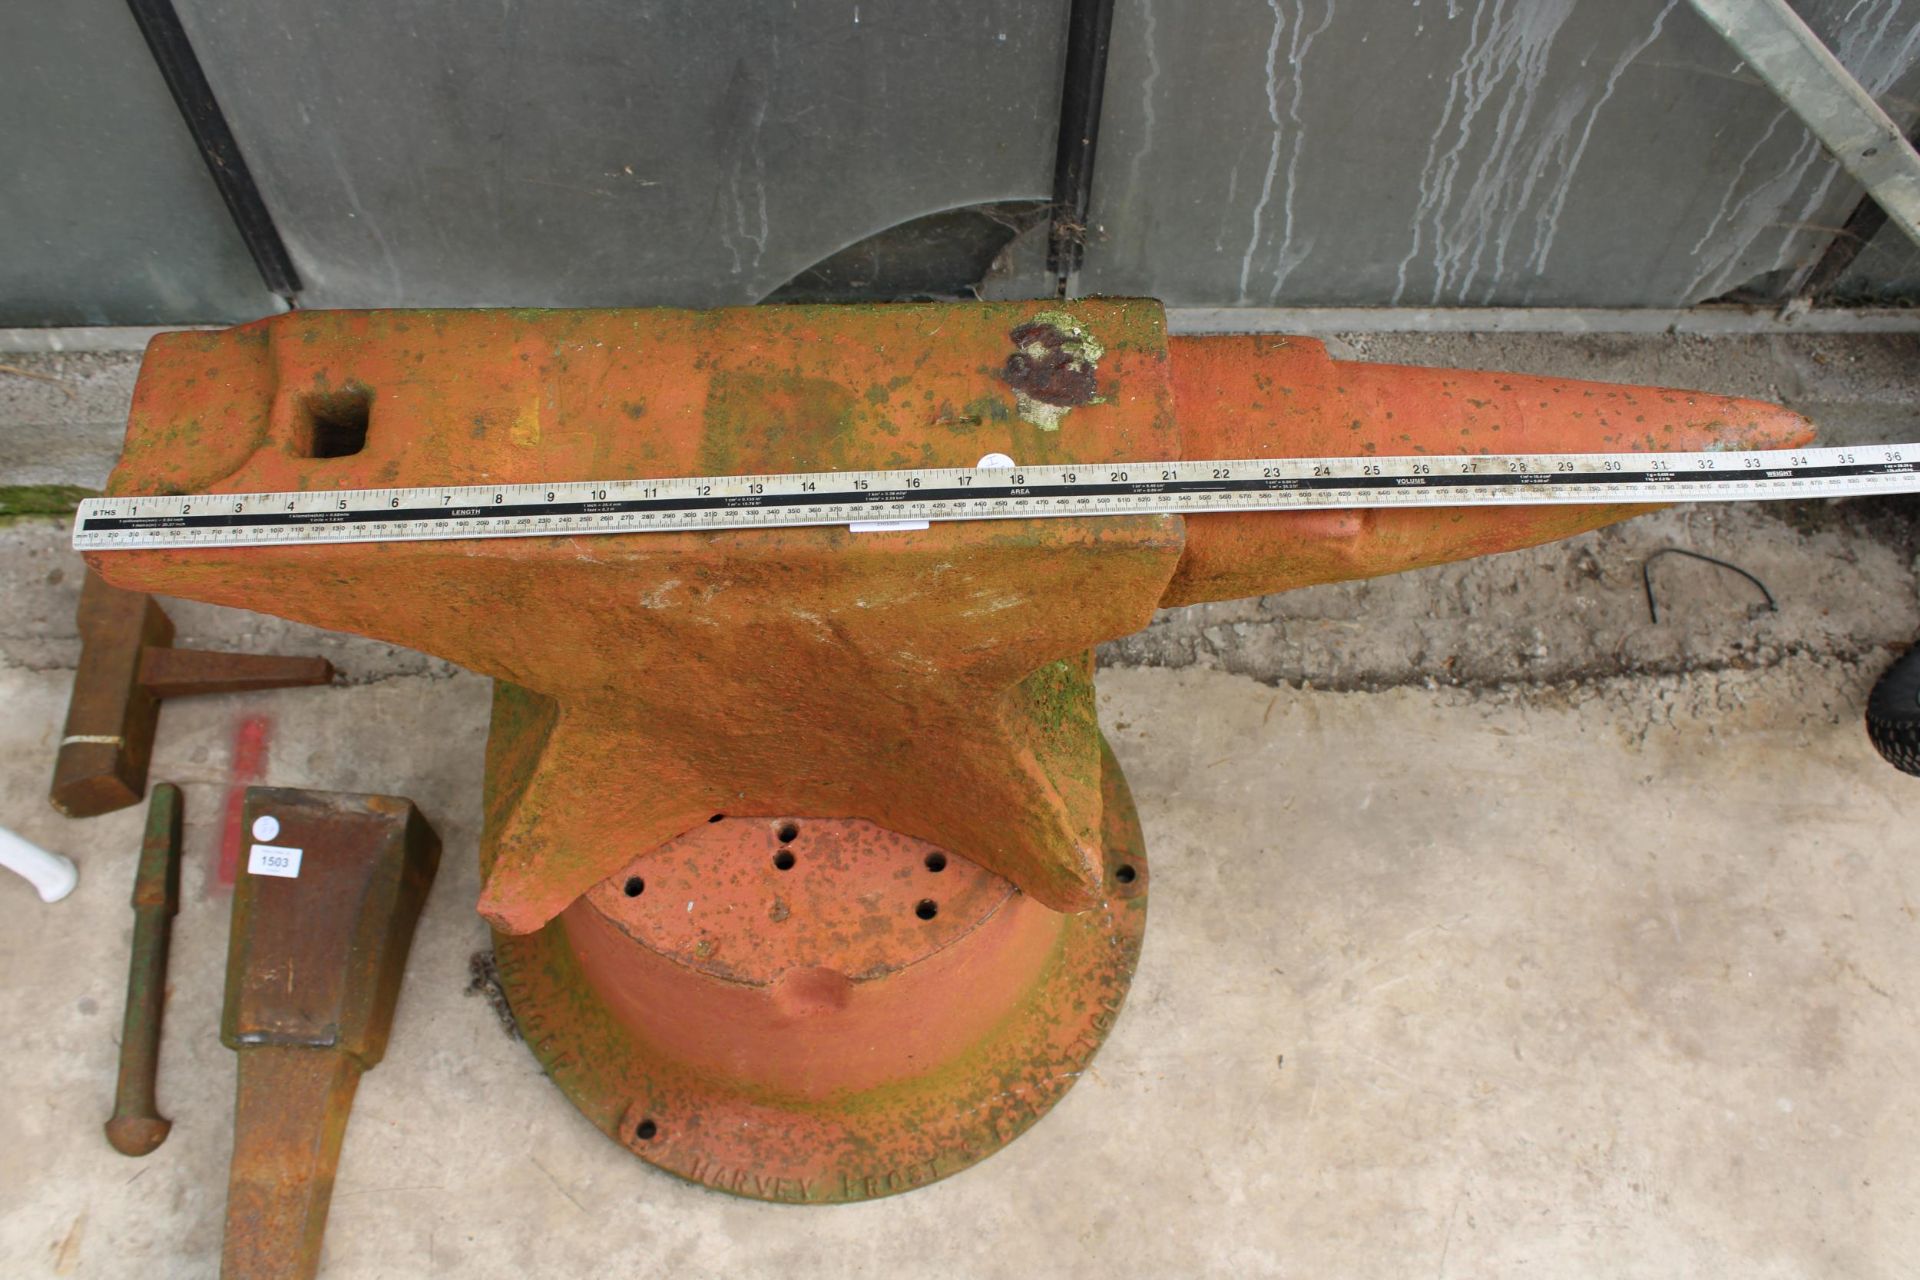 A LARGE HEAVY DUTY BLACKSMITHS ANVIL WITH CIRCULAR BASE (H:66CM L:89CM) - Image 4 of 7